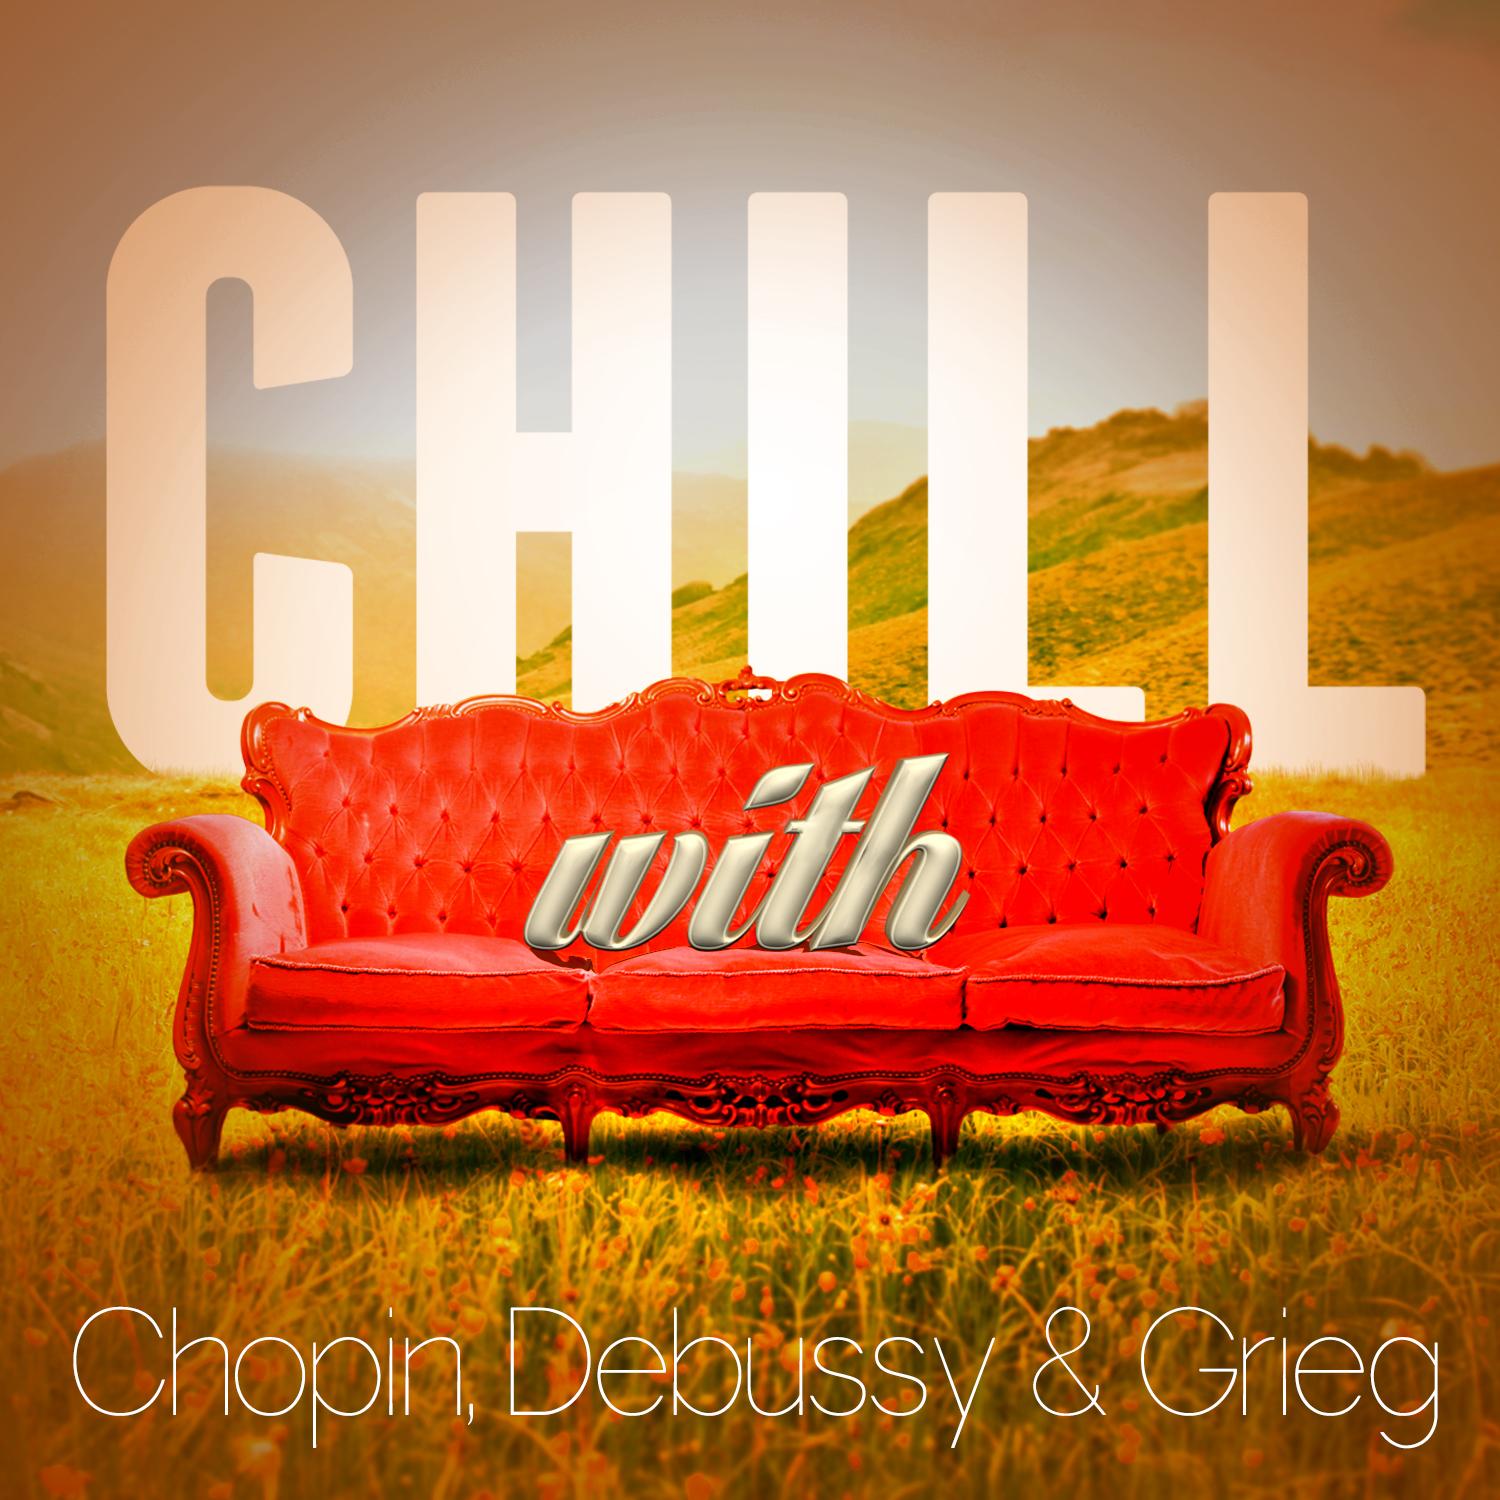 Chill with Chopin, Debussy & Grieg